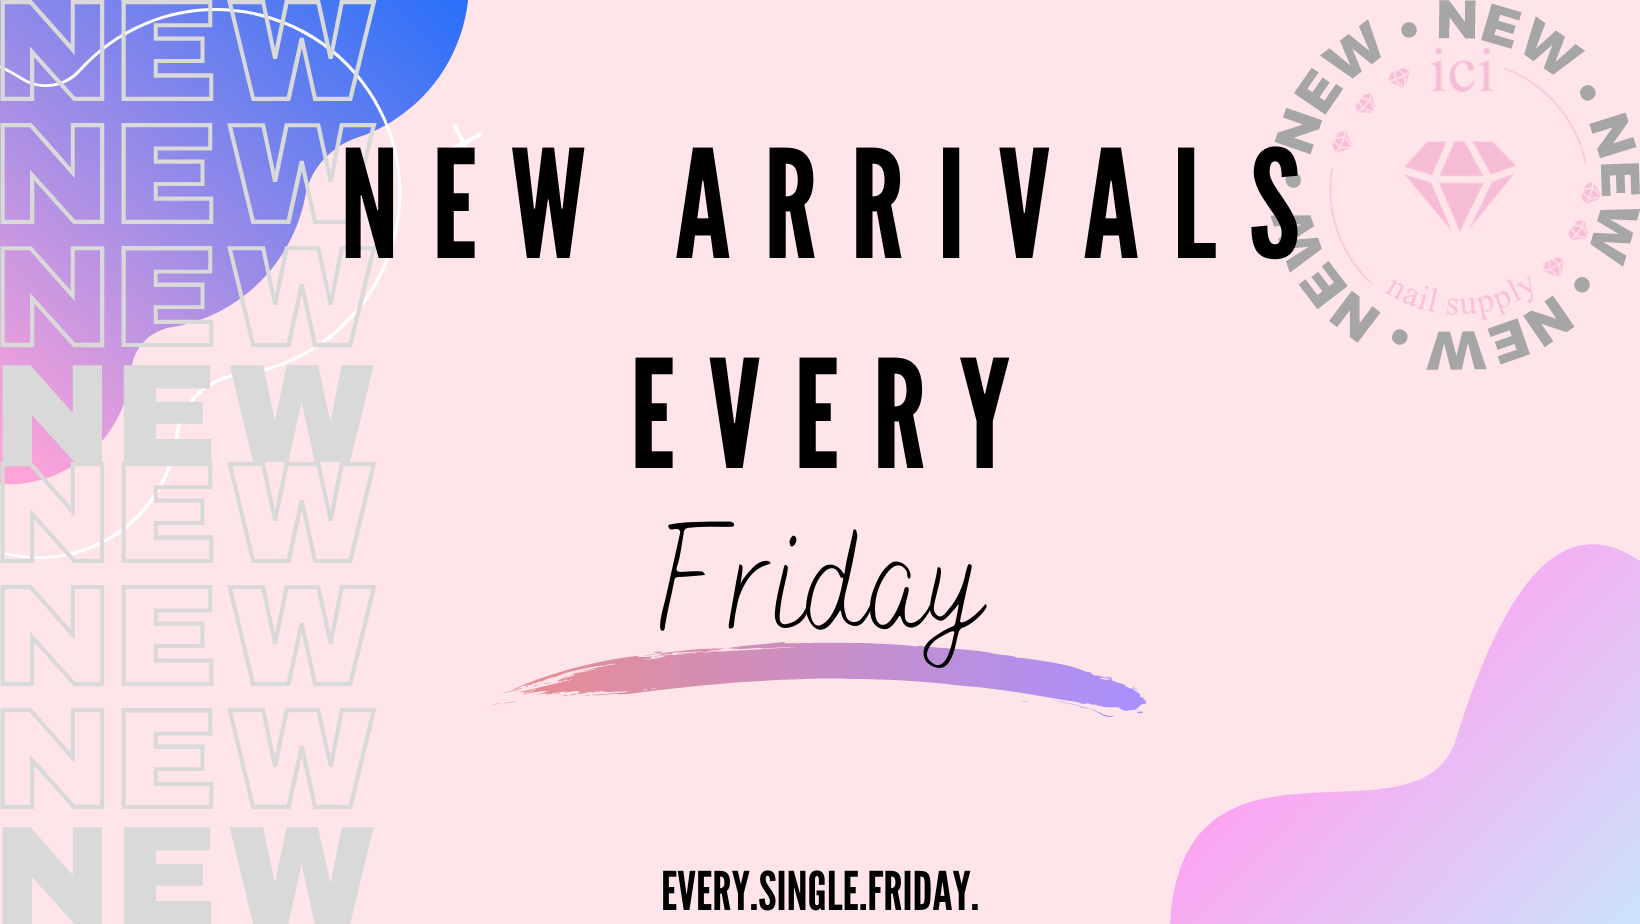 New Arrivals every Friday